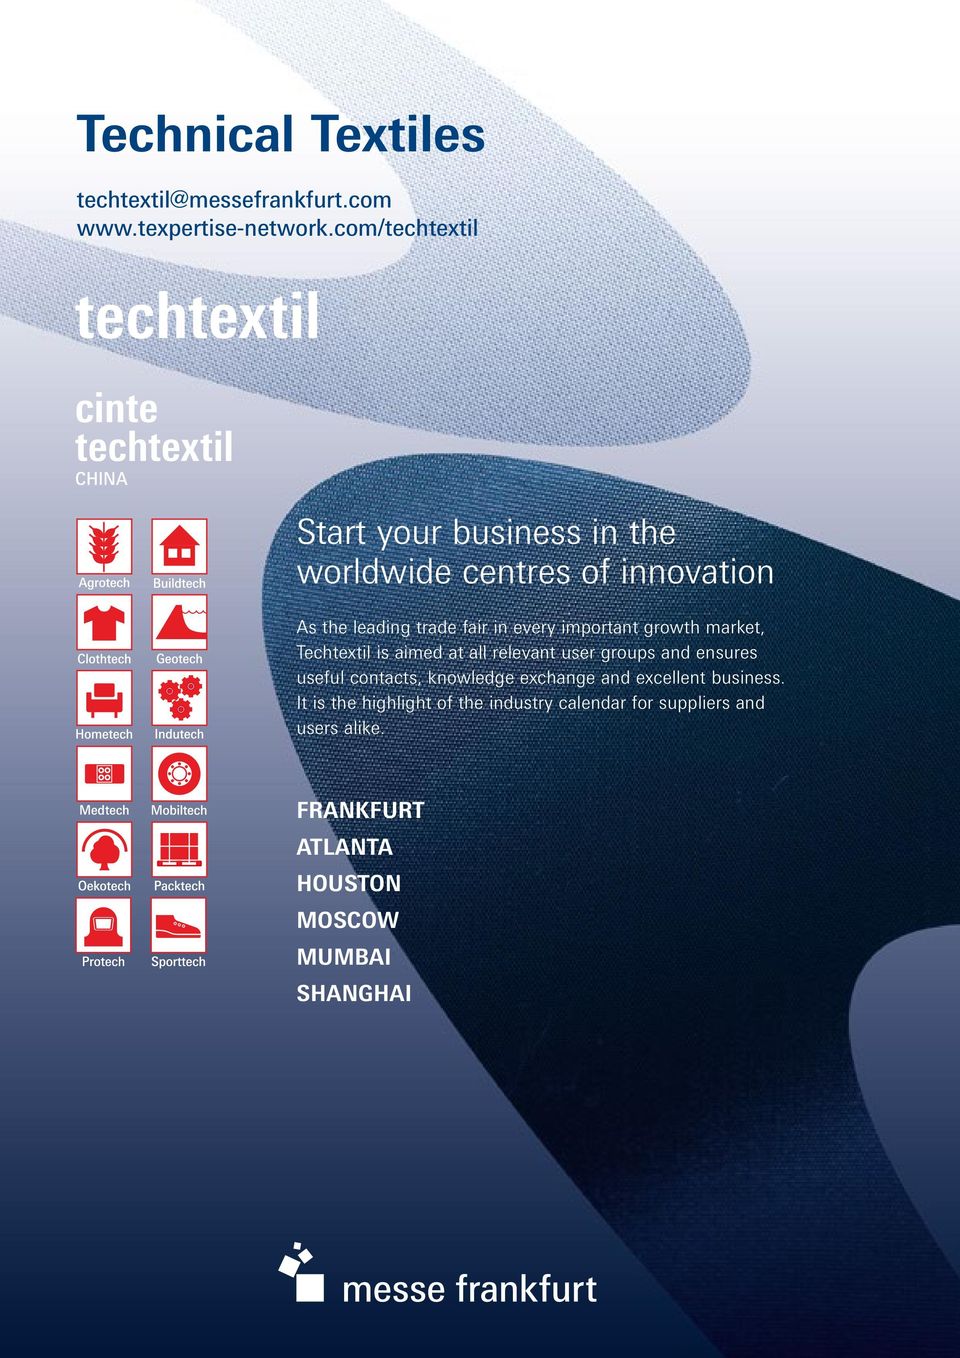 important growth market, Techtextil is aimed at all relevant user groups and ensures useful contacts, knowledge